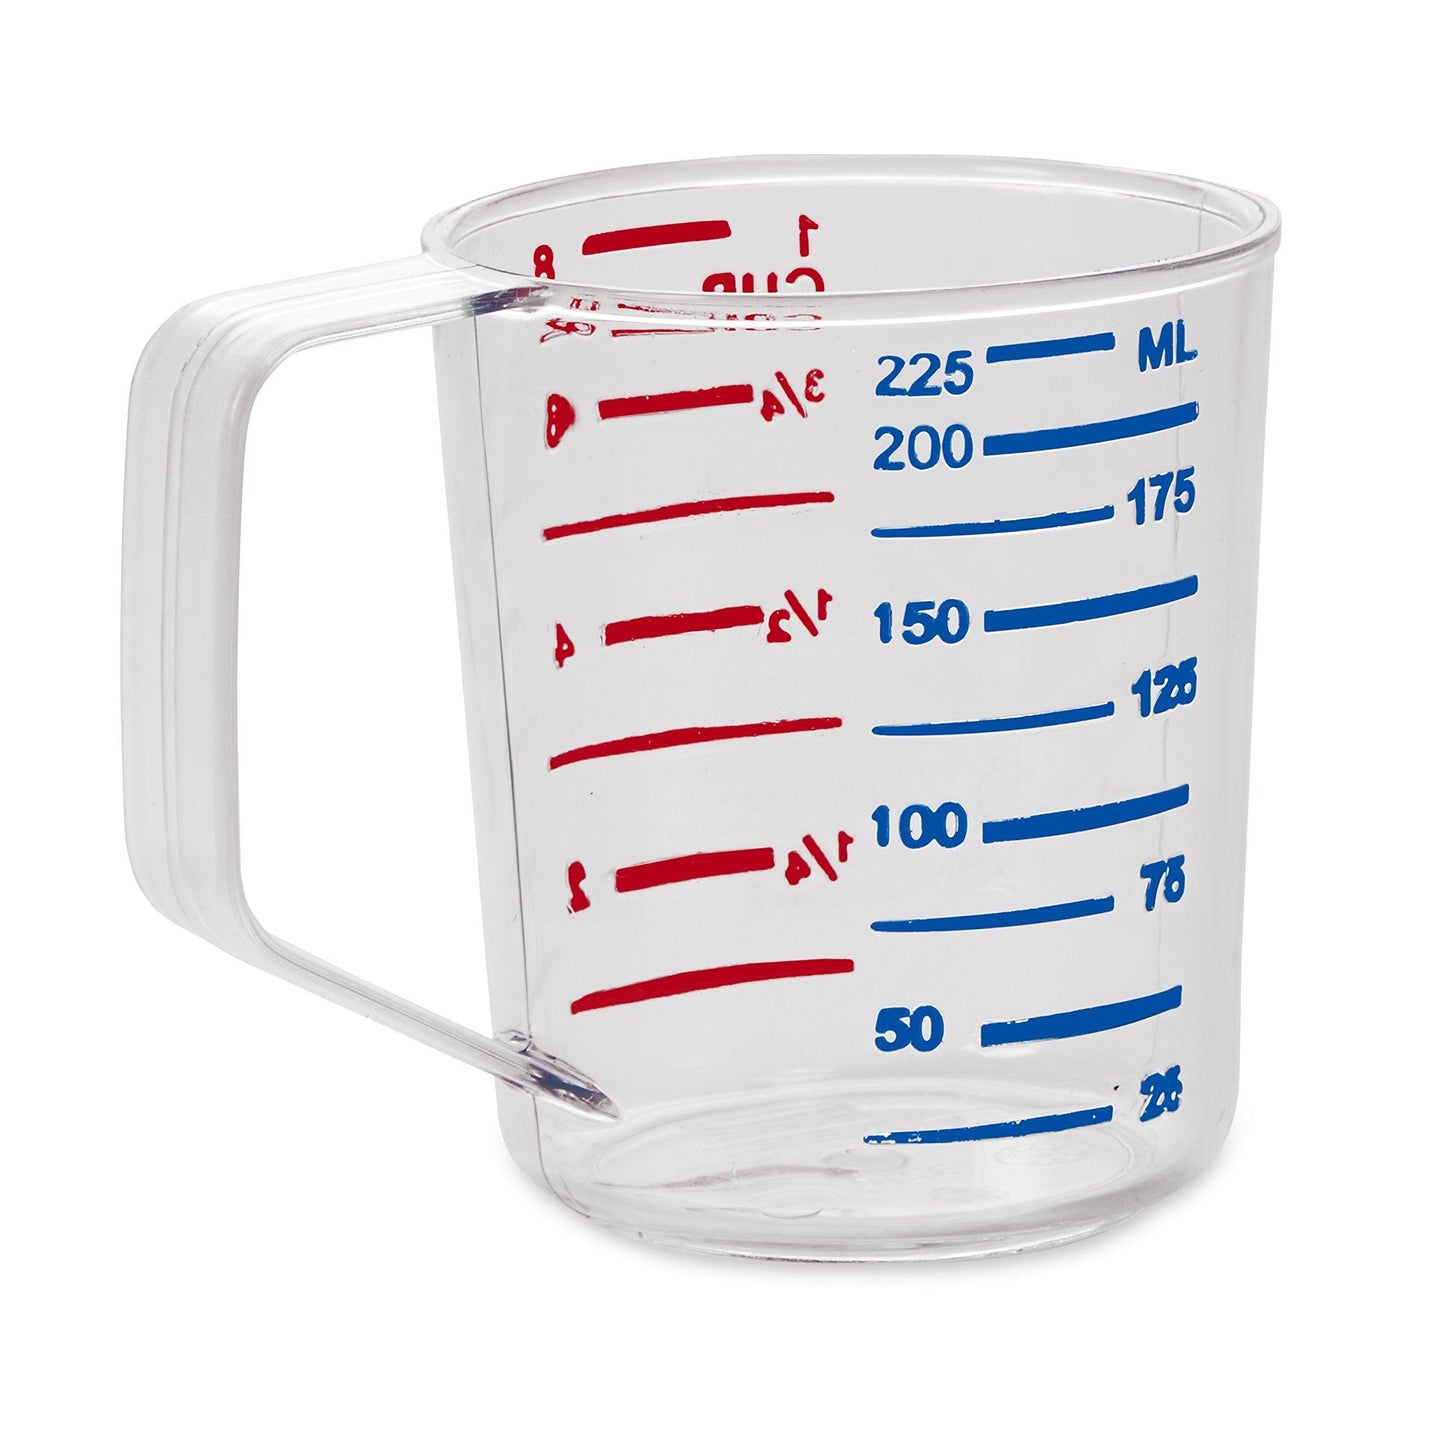 Rubbermaid Commercial Products Bouncer Clear Measuring Cup, 1-Cup, Clear, Strong Food Grade, for use with -40-degree F to 212-degree F, Easy Read for Liquid/Dry Ingredients while Cooking - CookCave